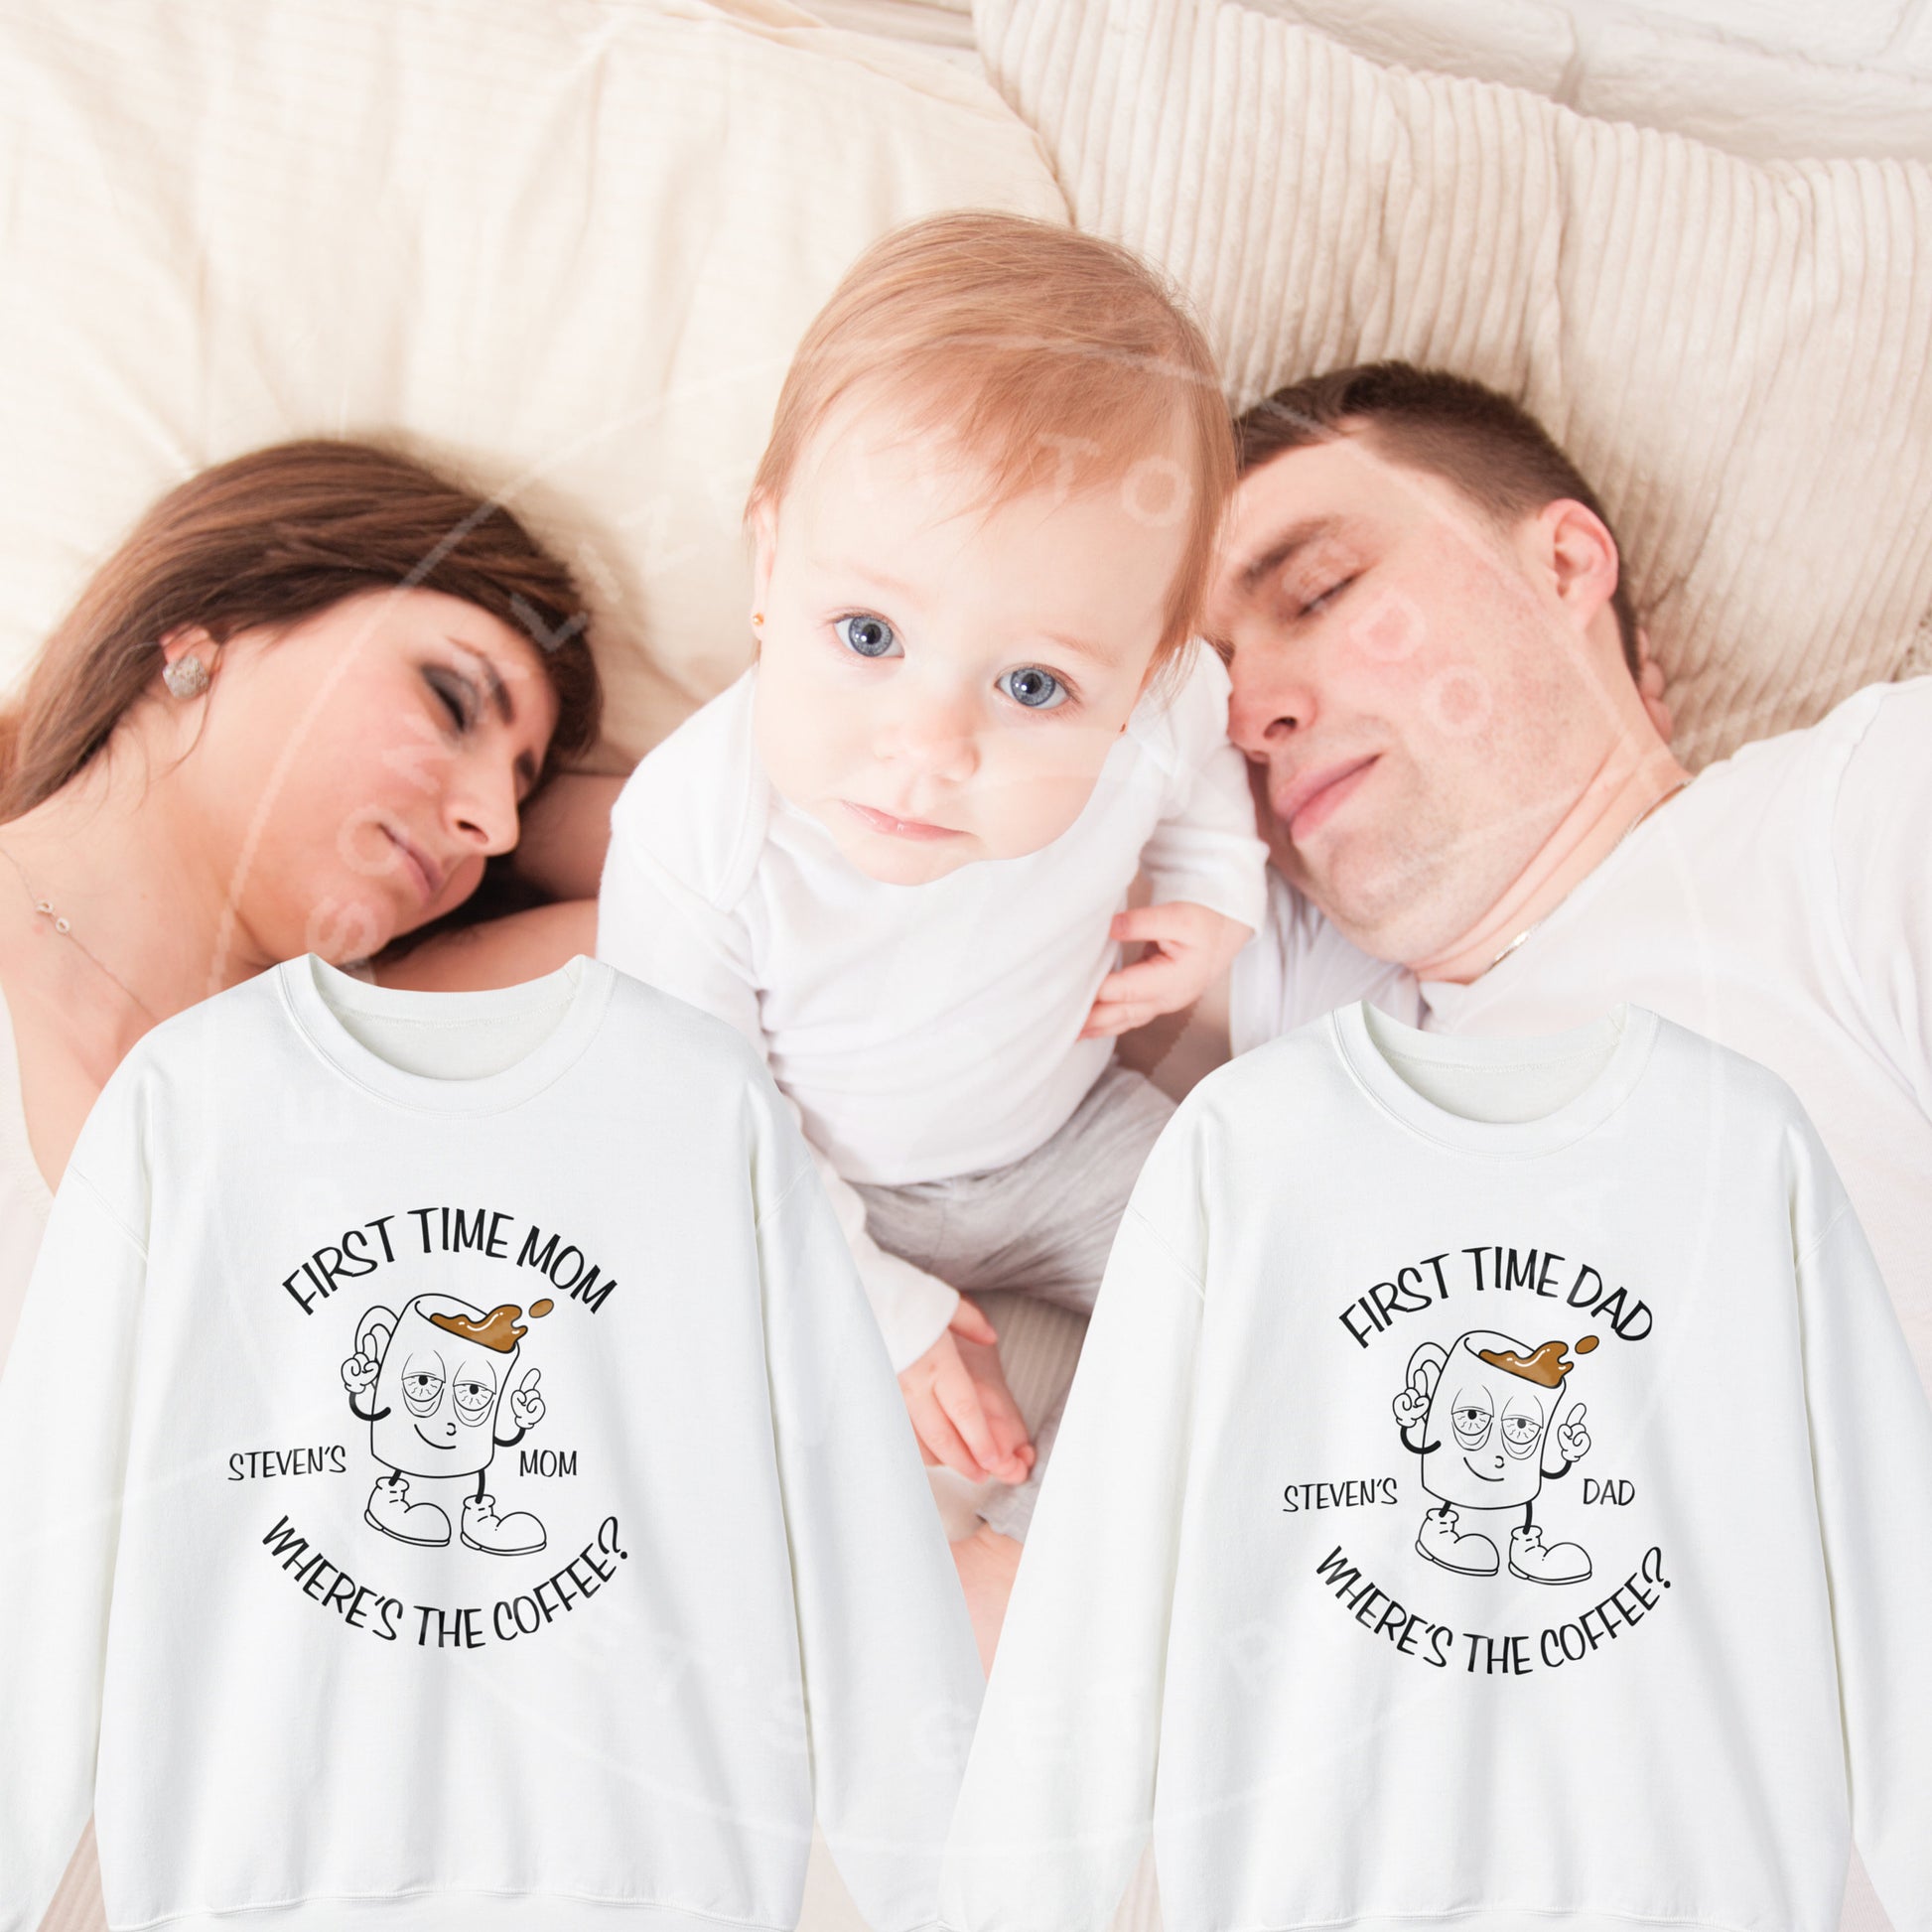 New Dad Gifts, New Mom Gift, Funny Sweatshirt For New Parents, Custom Gifts For First Time Parents, Humorous Apparel for Moms and Dads